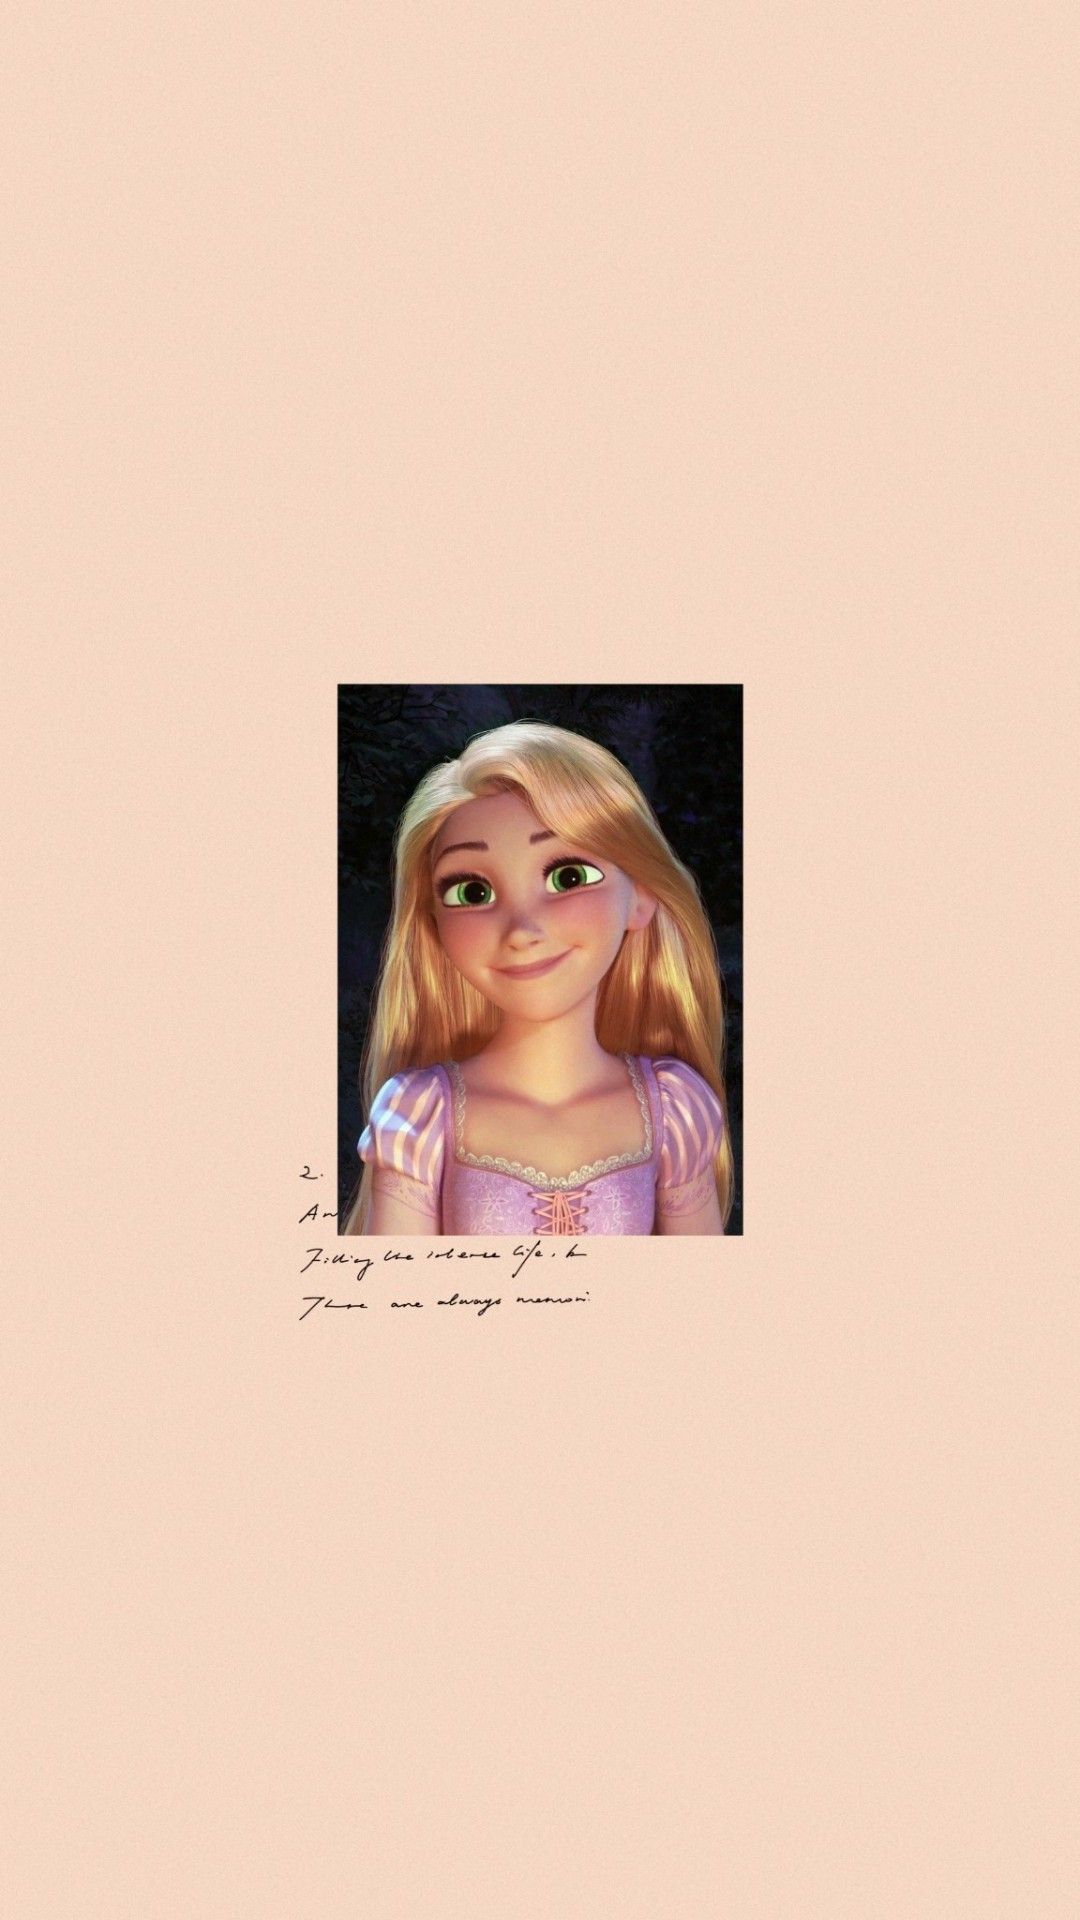 A picture of rapunzel with her hair in braids - Rapunzel